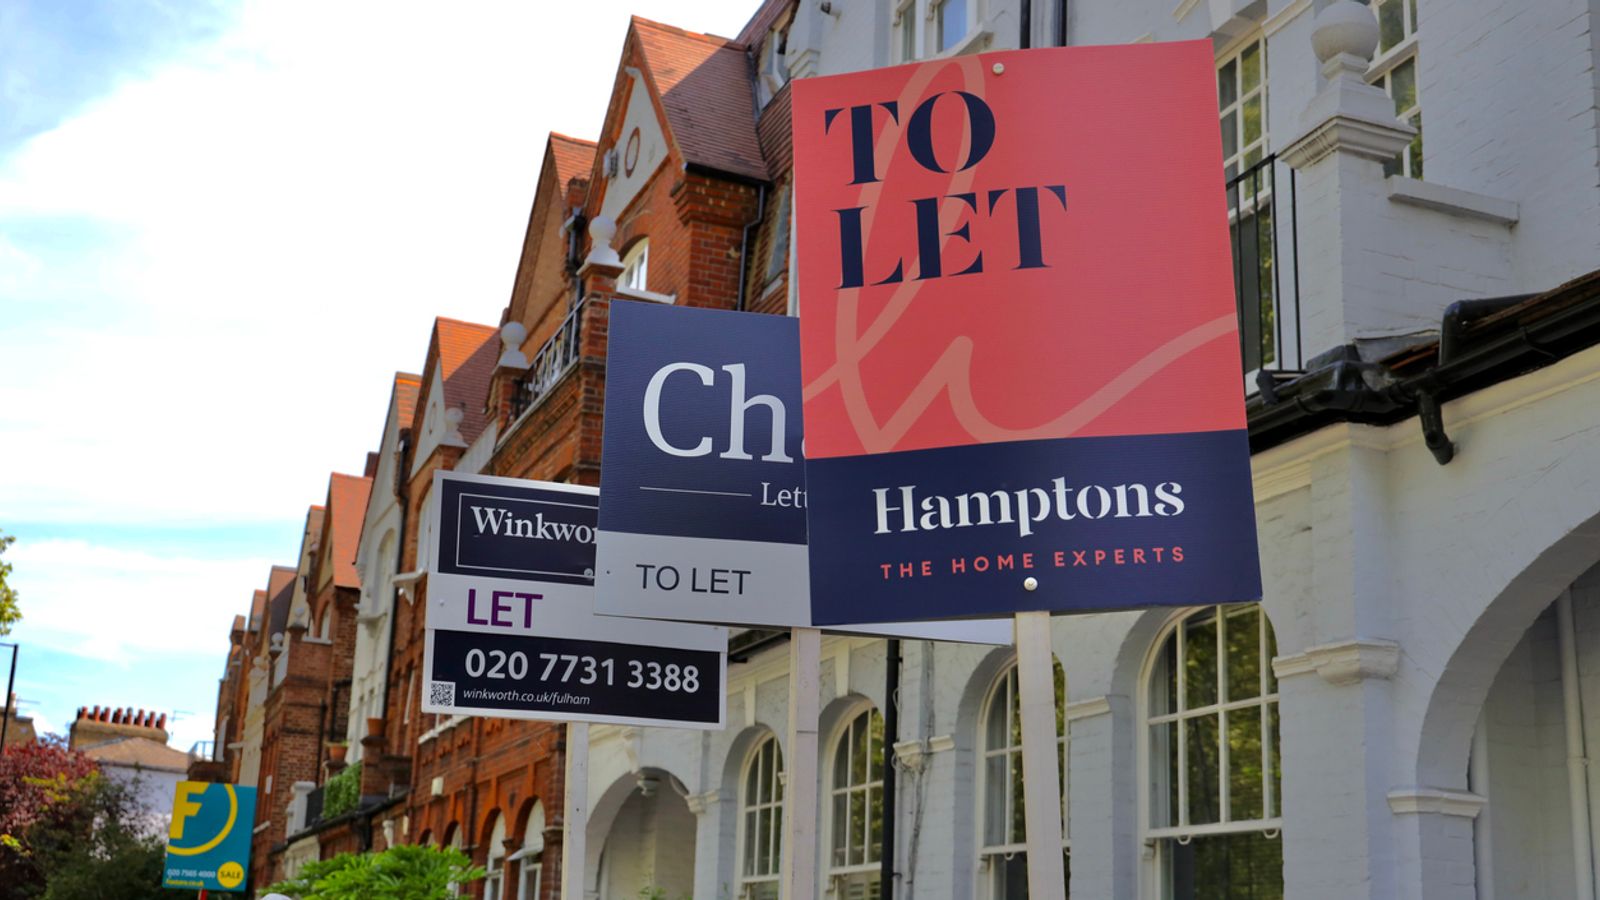 Average asking rental price hit record high for homes inside and outside of London